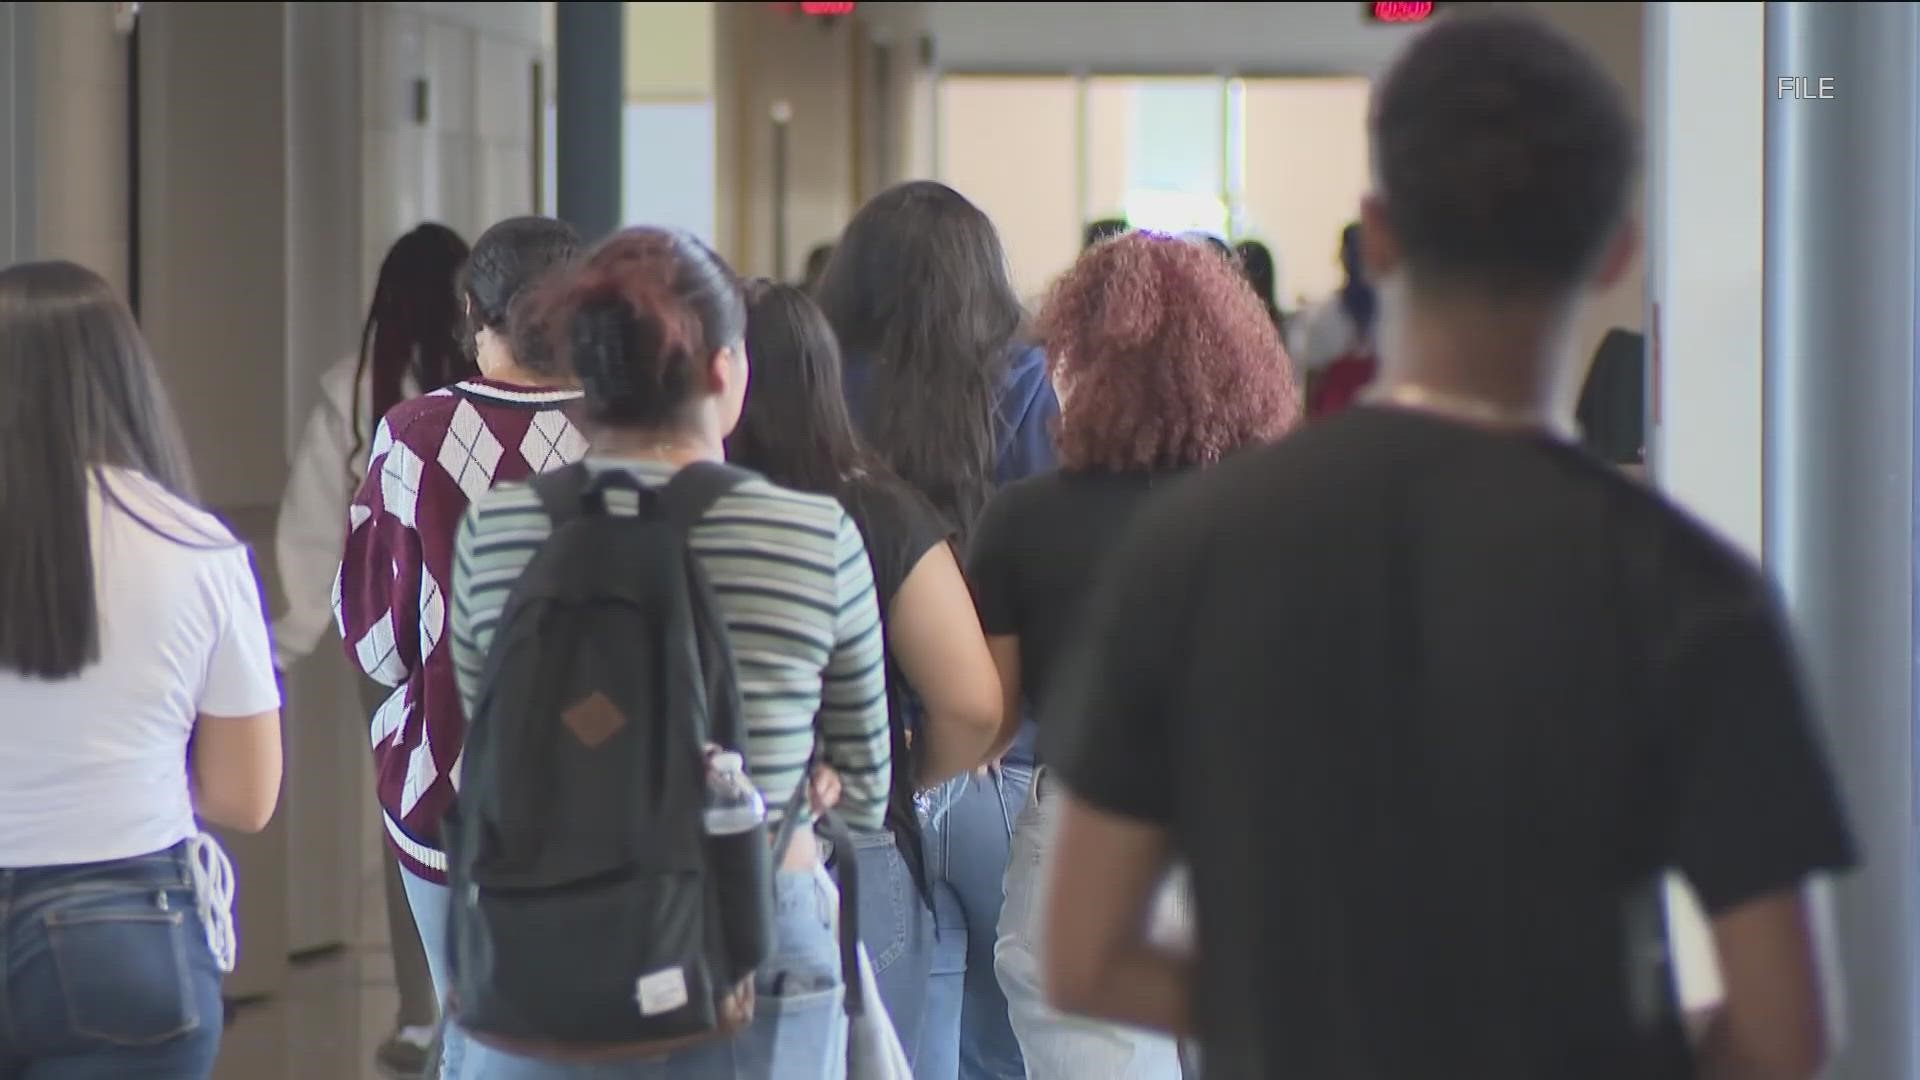 Local advocacy groups are working with the Travis County Sheriff's Office to raise awareness about teen dating violence.